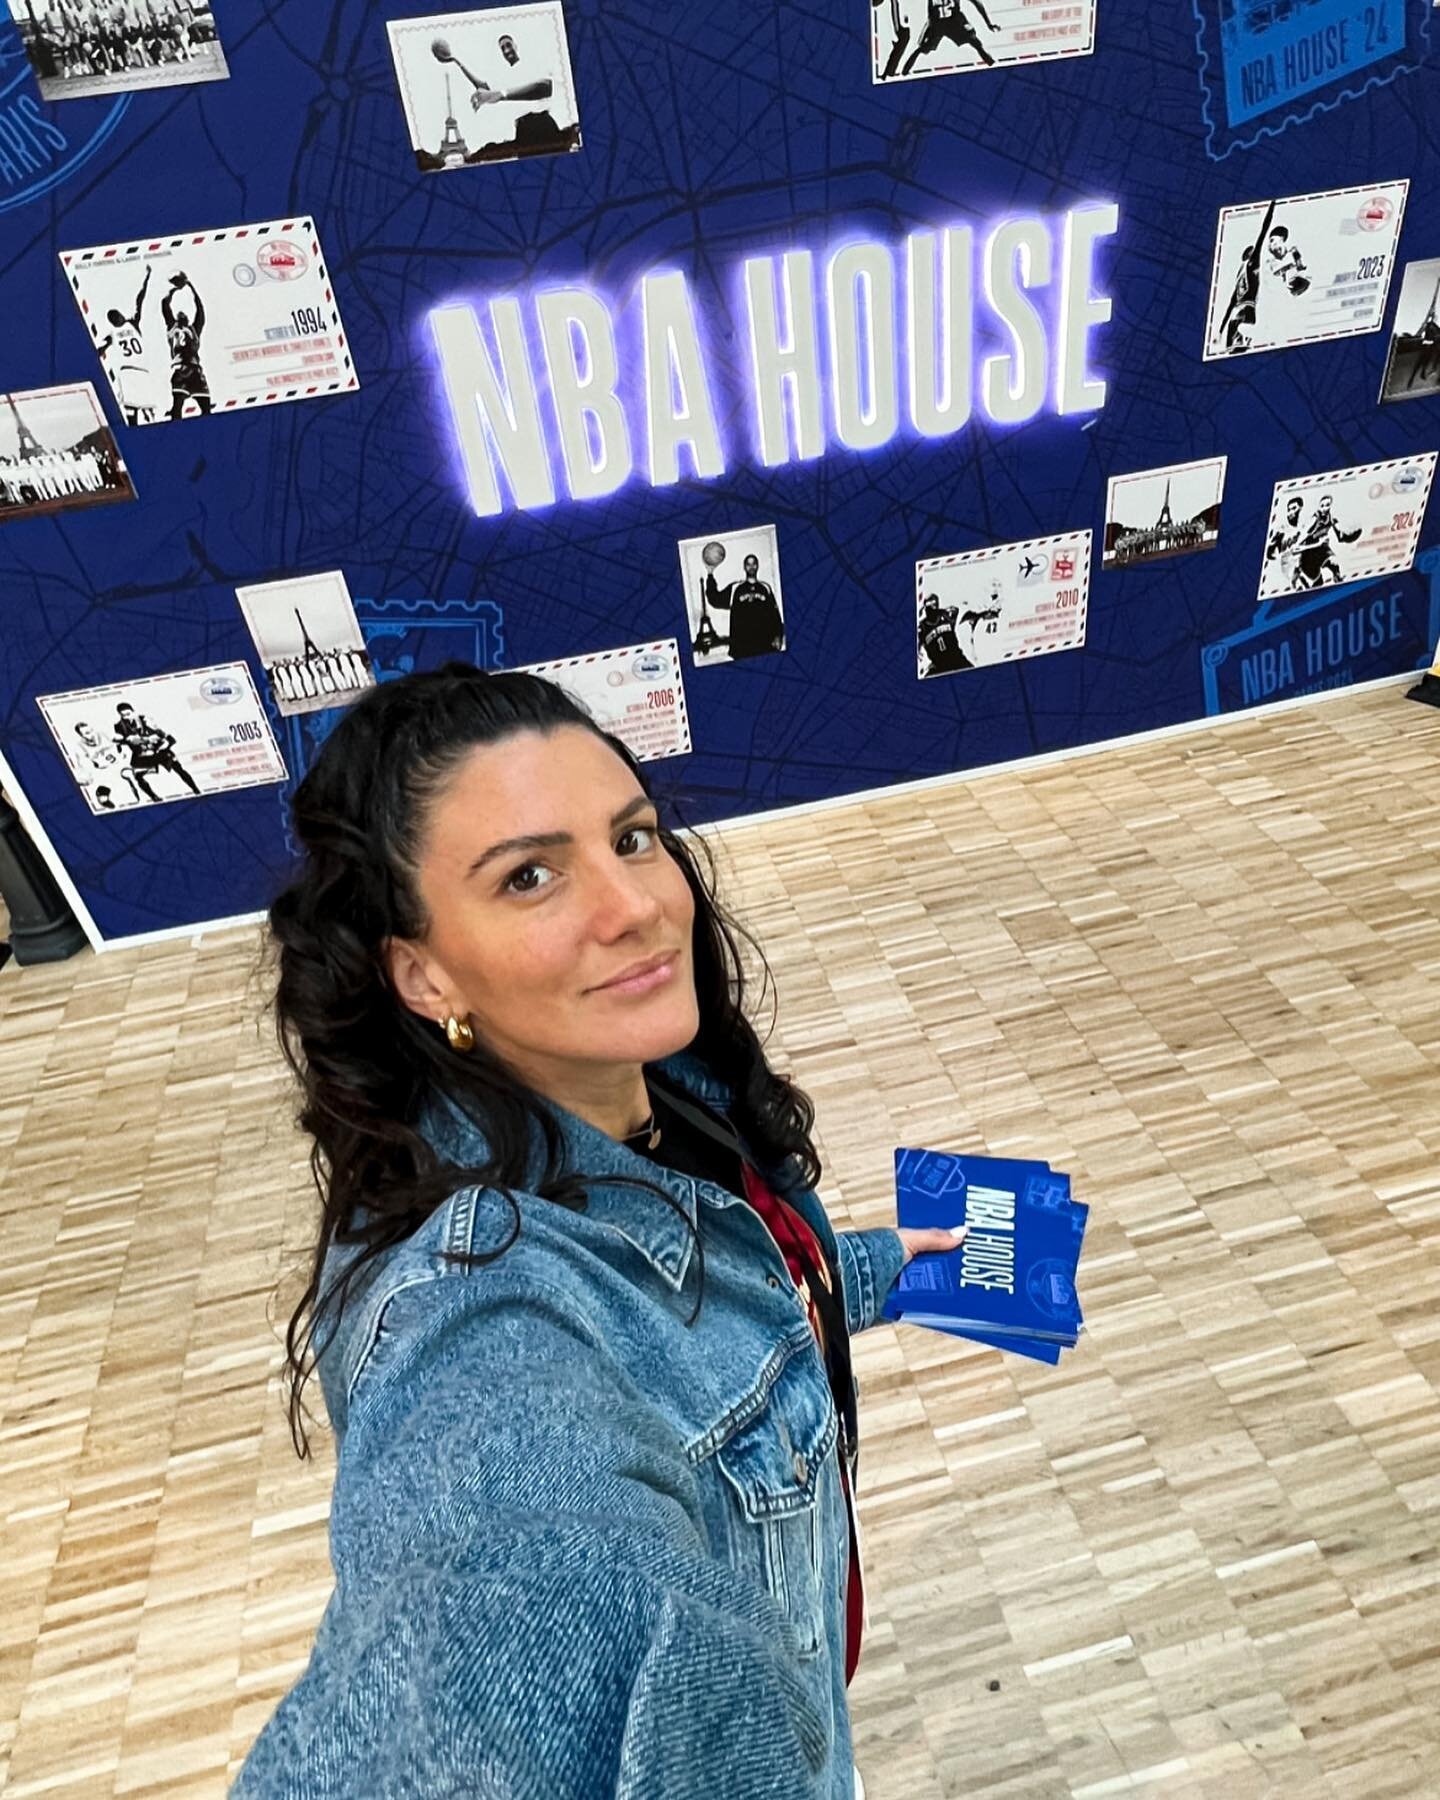 &bull; some highlights of the NBA House this week @nbaeurope 🏀&thinsp;
&thinsp;
I had the best time hosting all the events, games, and performances in this beautiful place dedicated to basketball and the @nba.&thinsp;
You know you are exactly where 